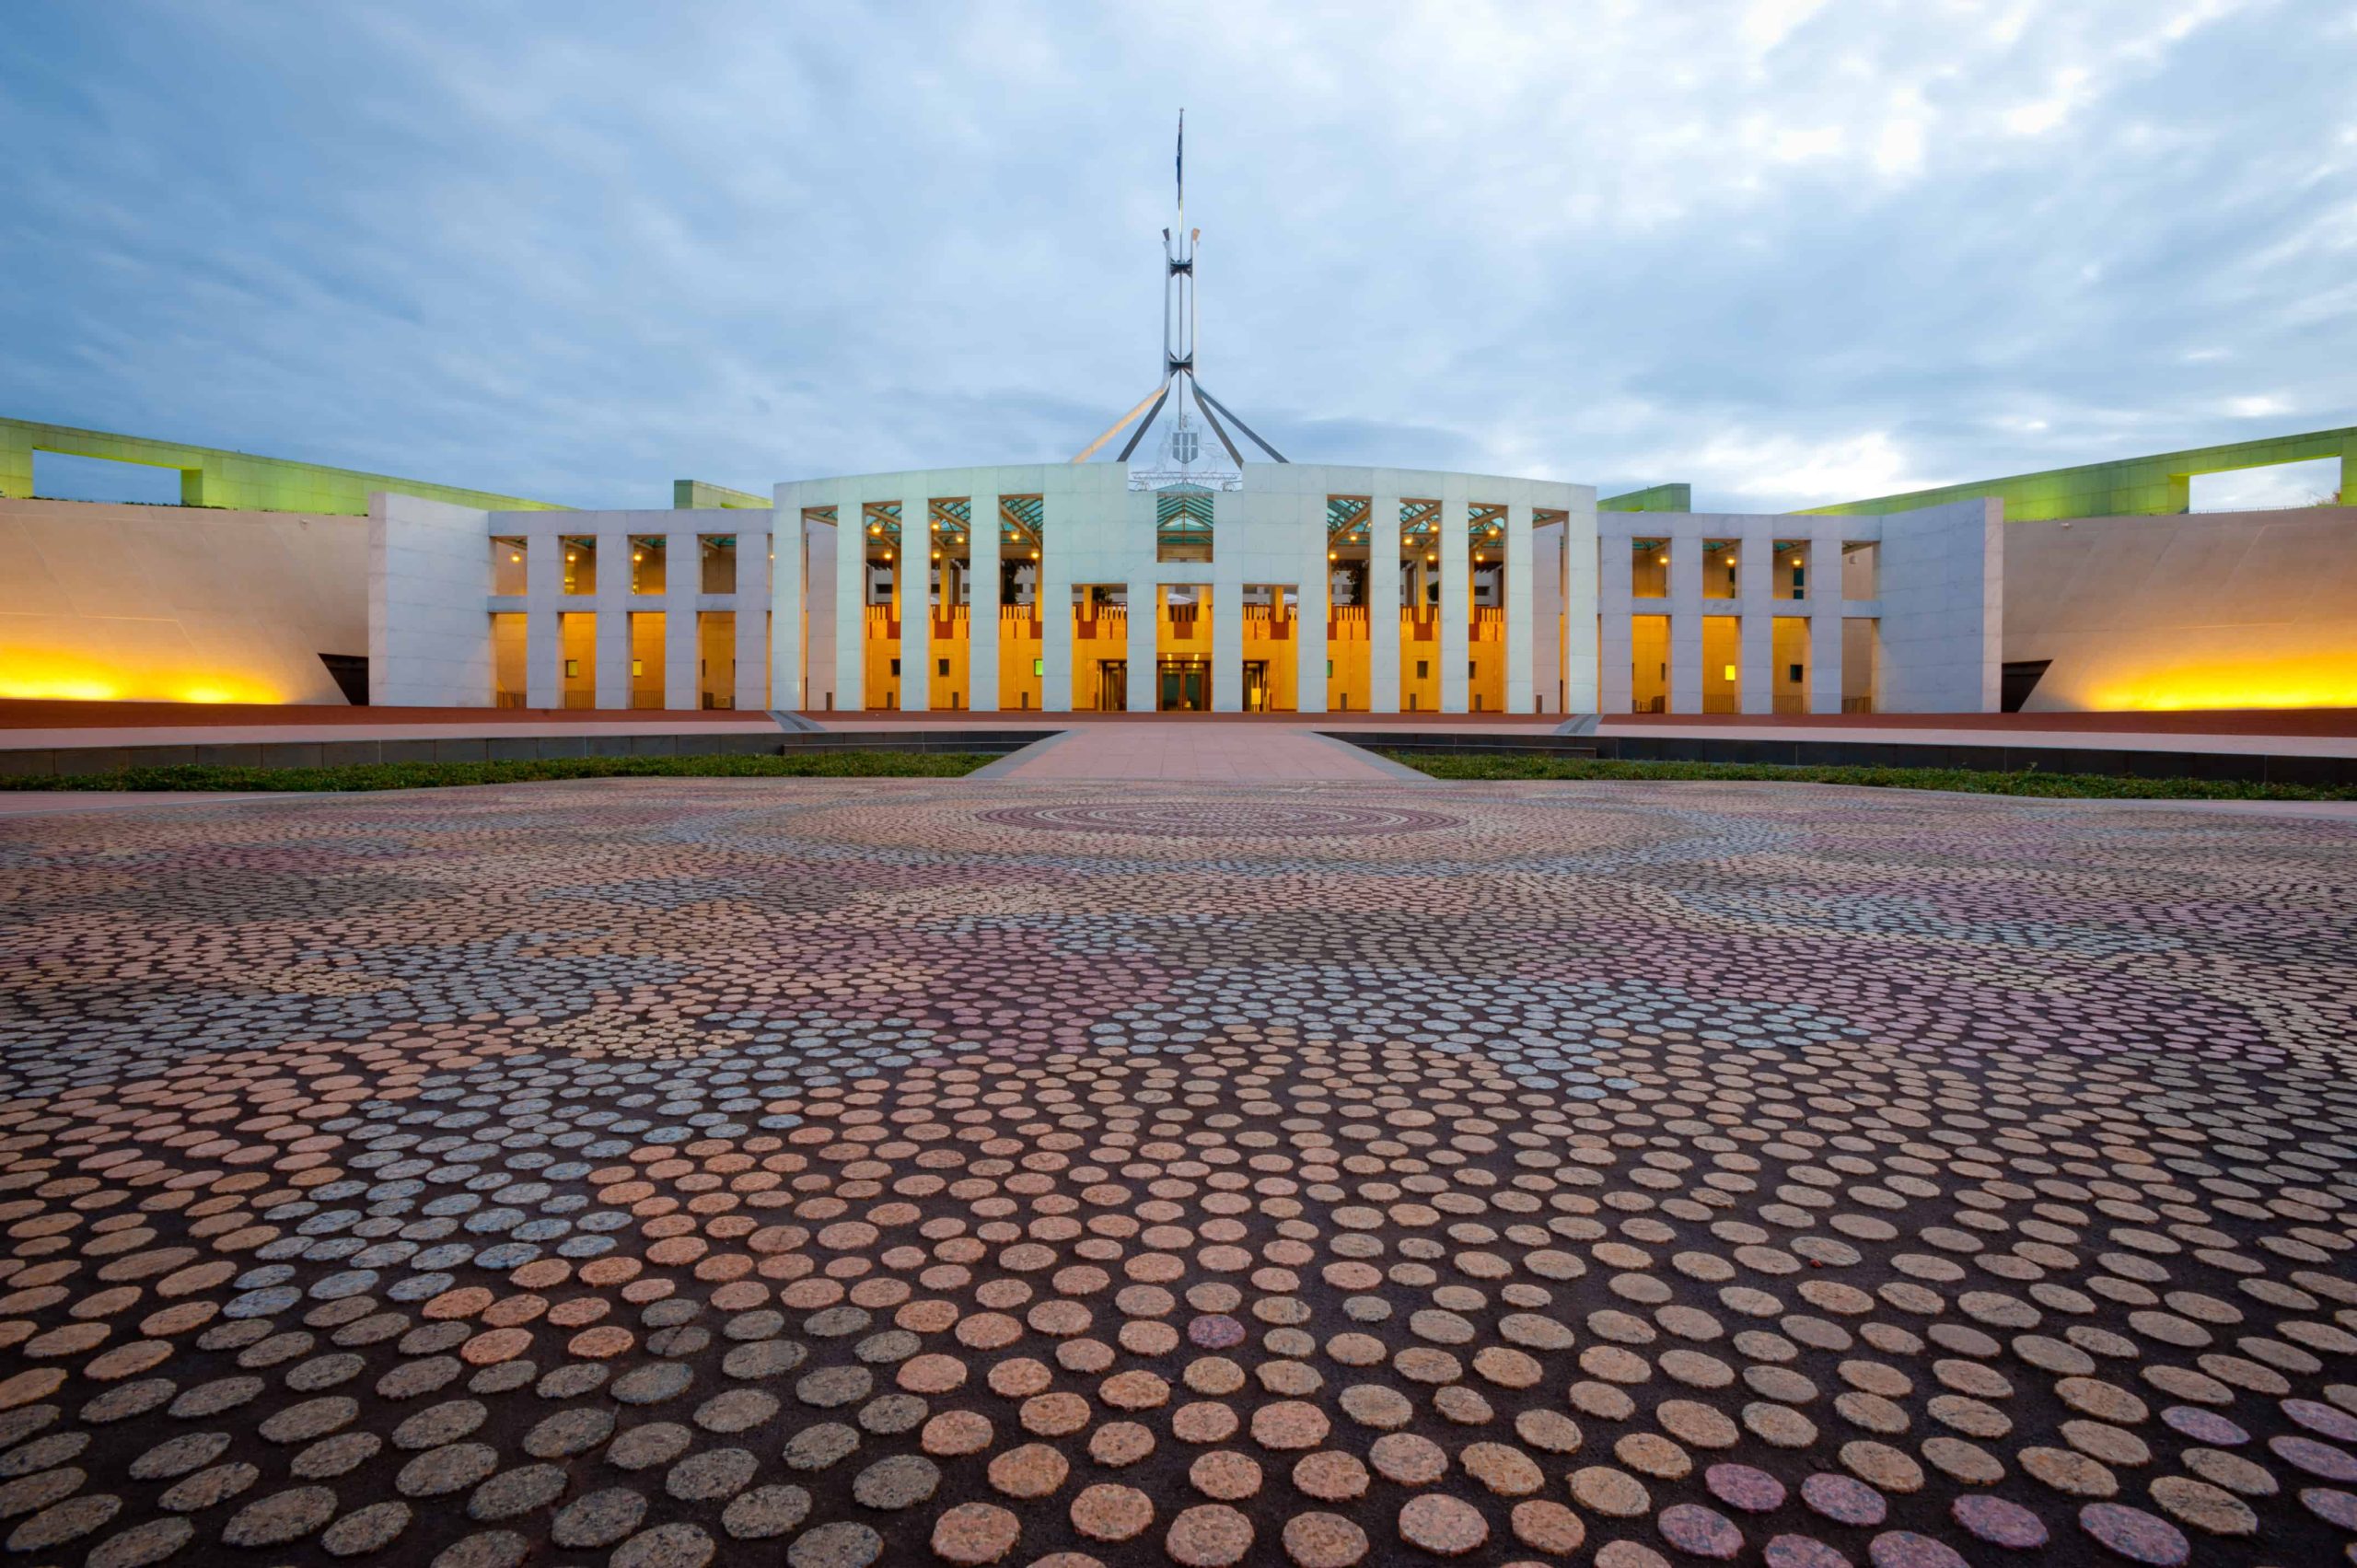 Wide view image of the Parliament House